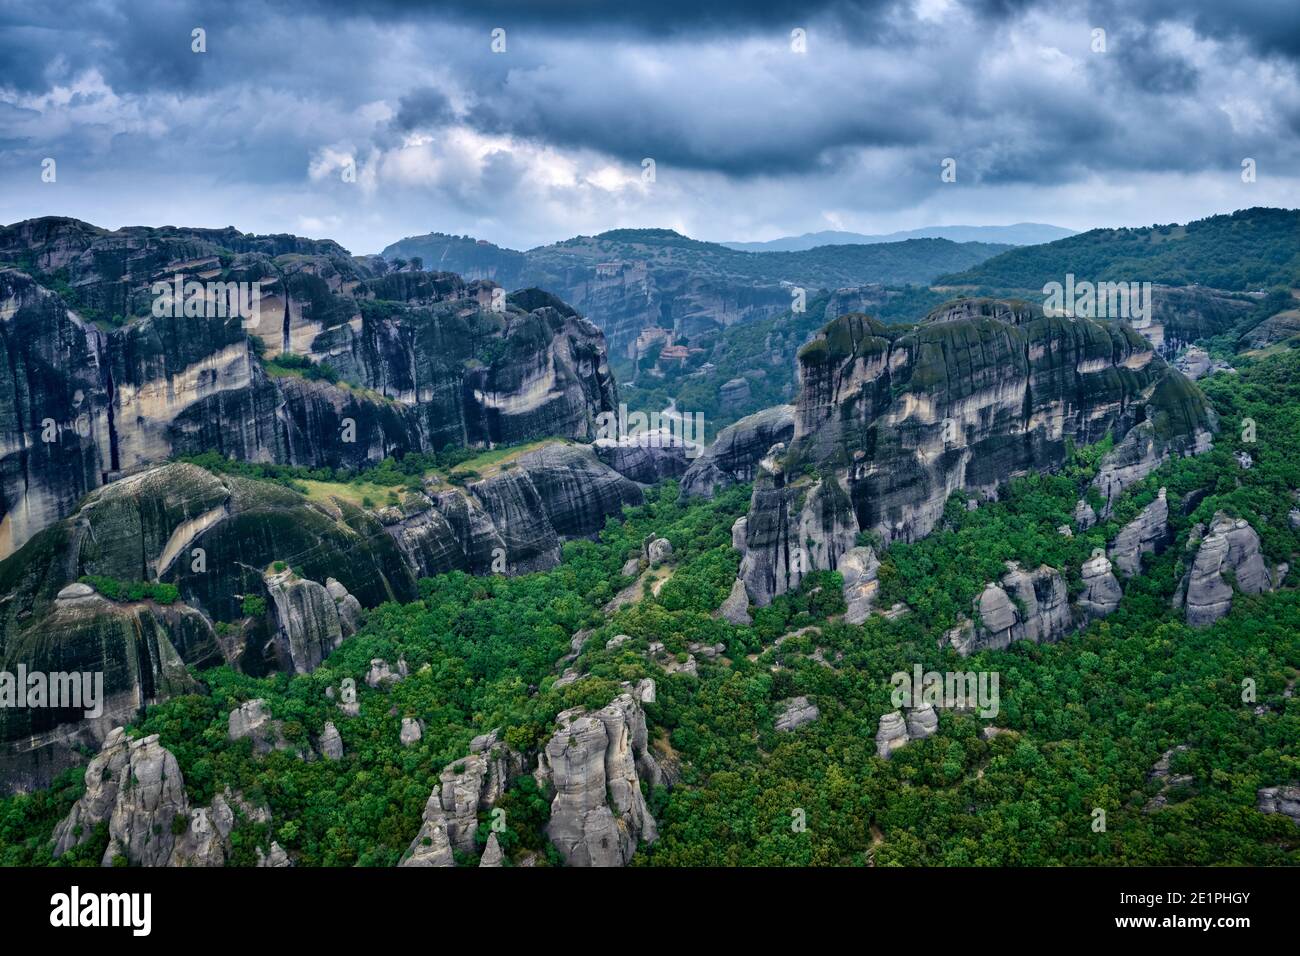 View over impressive pillars of sedimentary rocks in iconic Meteora valley at cloudy spring day. Hills covered with trees, winding roads, Greece Stock Photo